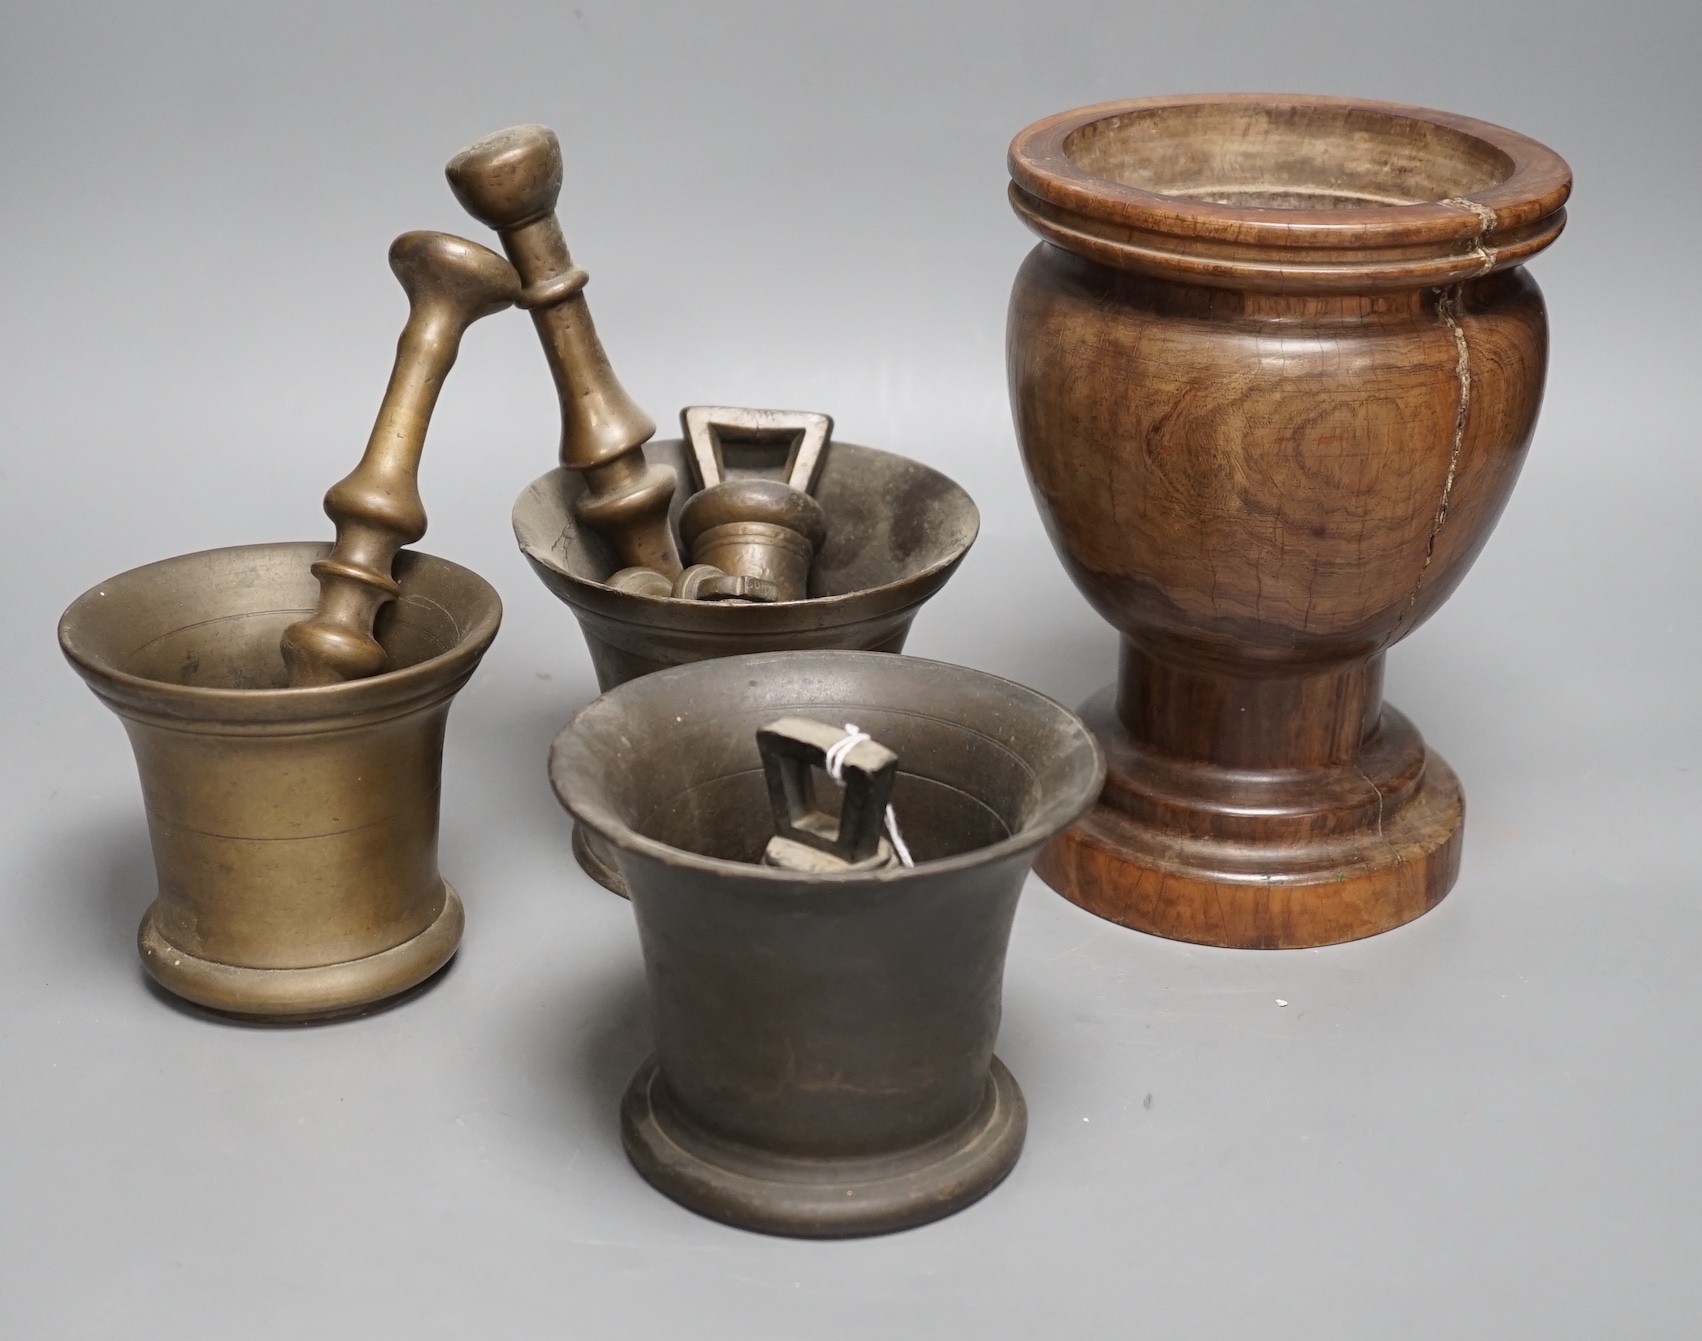 Three bell metal mortars, two pestles, a turned lignum vitae mortar and three postal weights, urn height 20cm